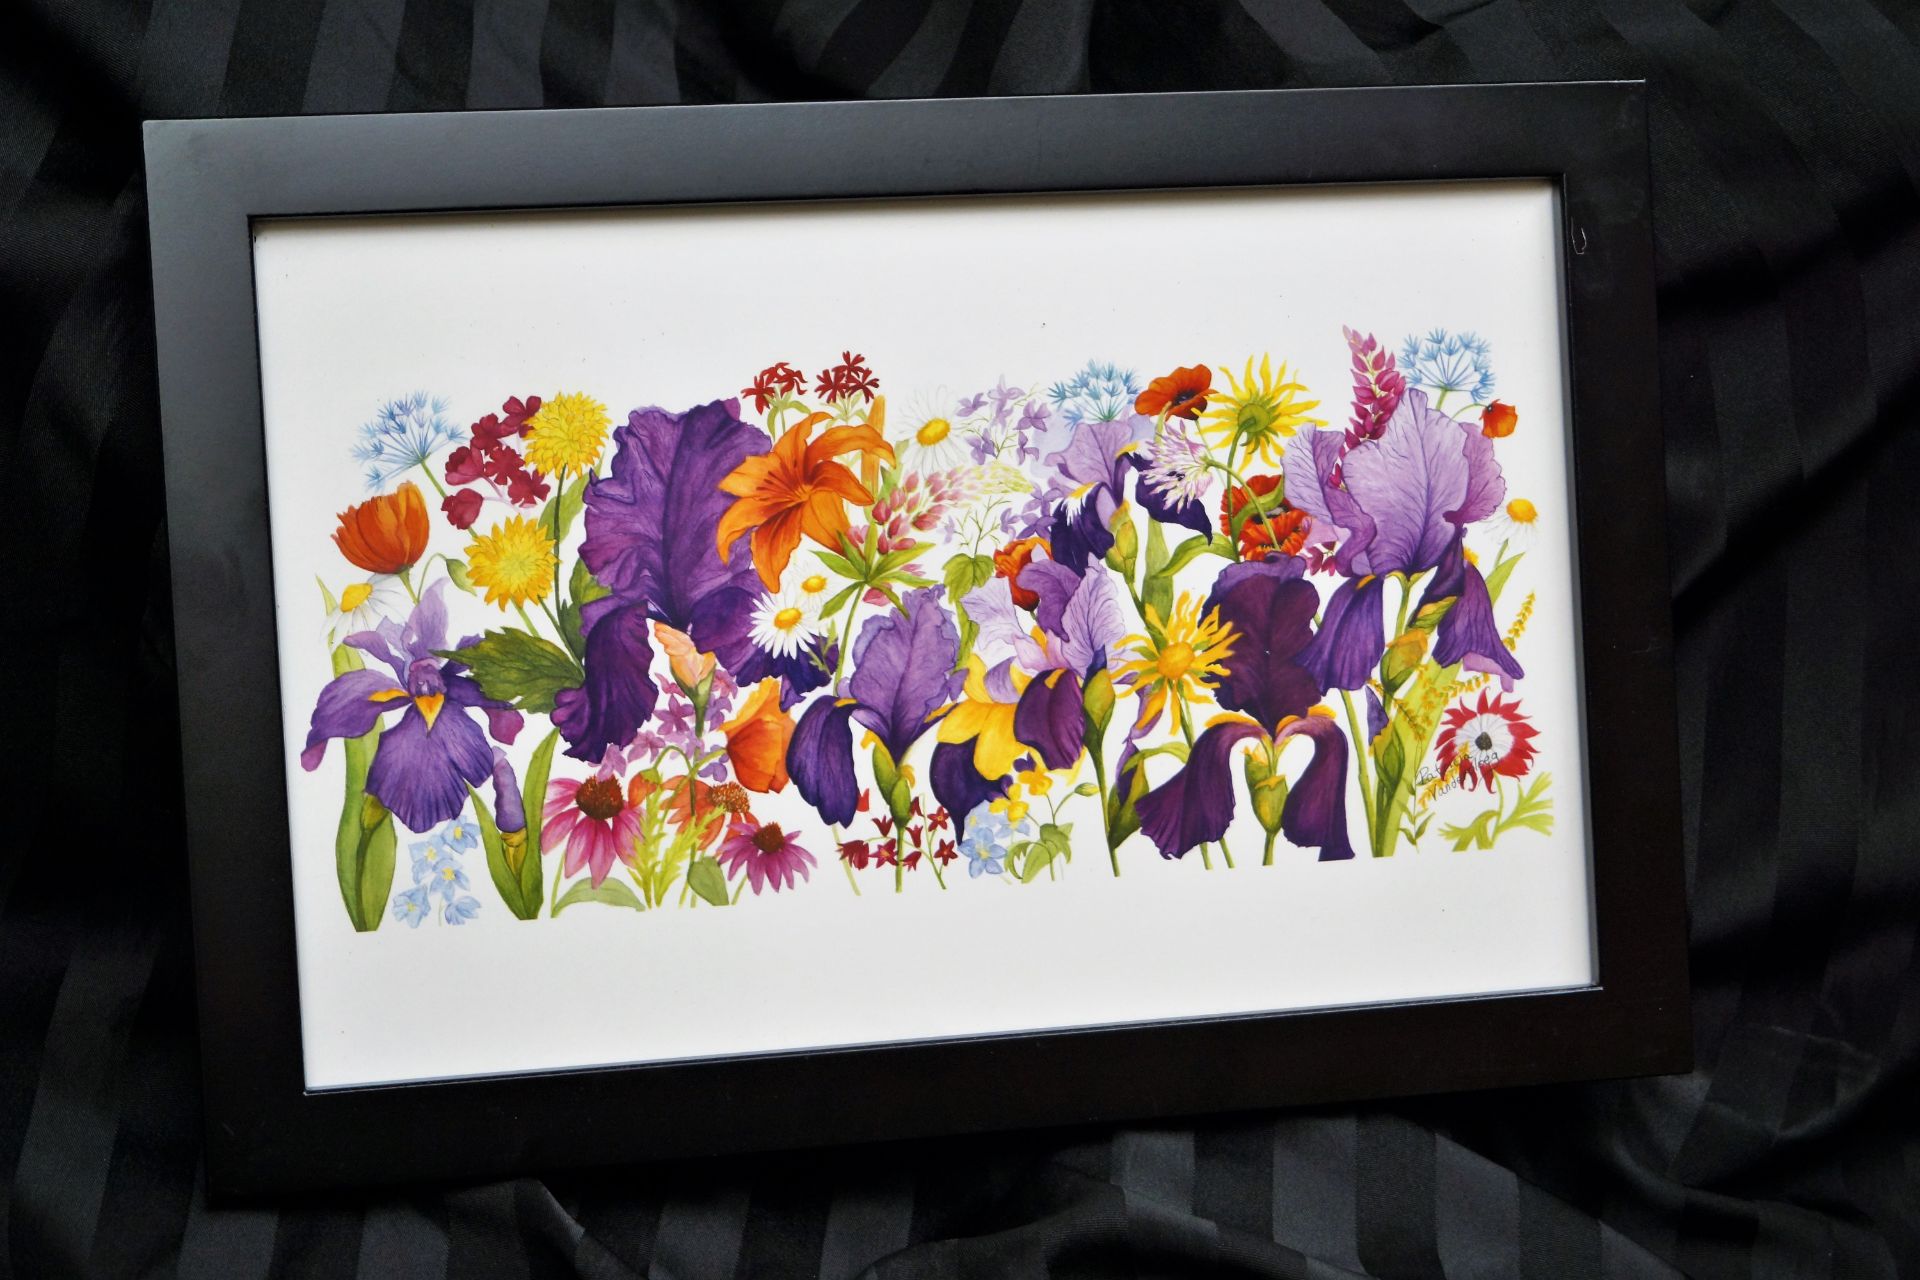 FRAMED FLOWERS PRINT Frame is 12.5"" Tall x 19"" Wide. Picture was made by Patricia Vanderploeg